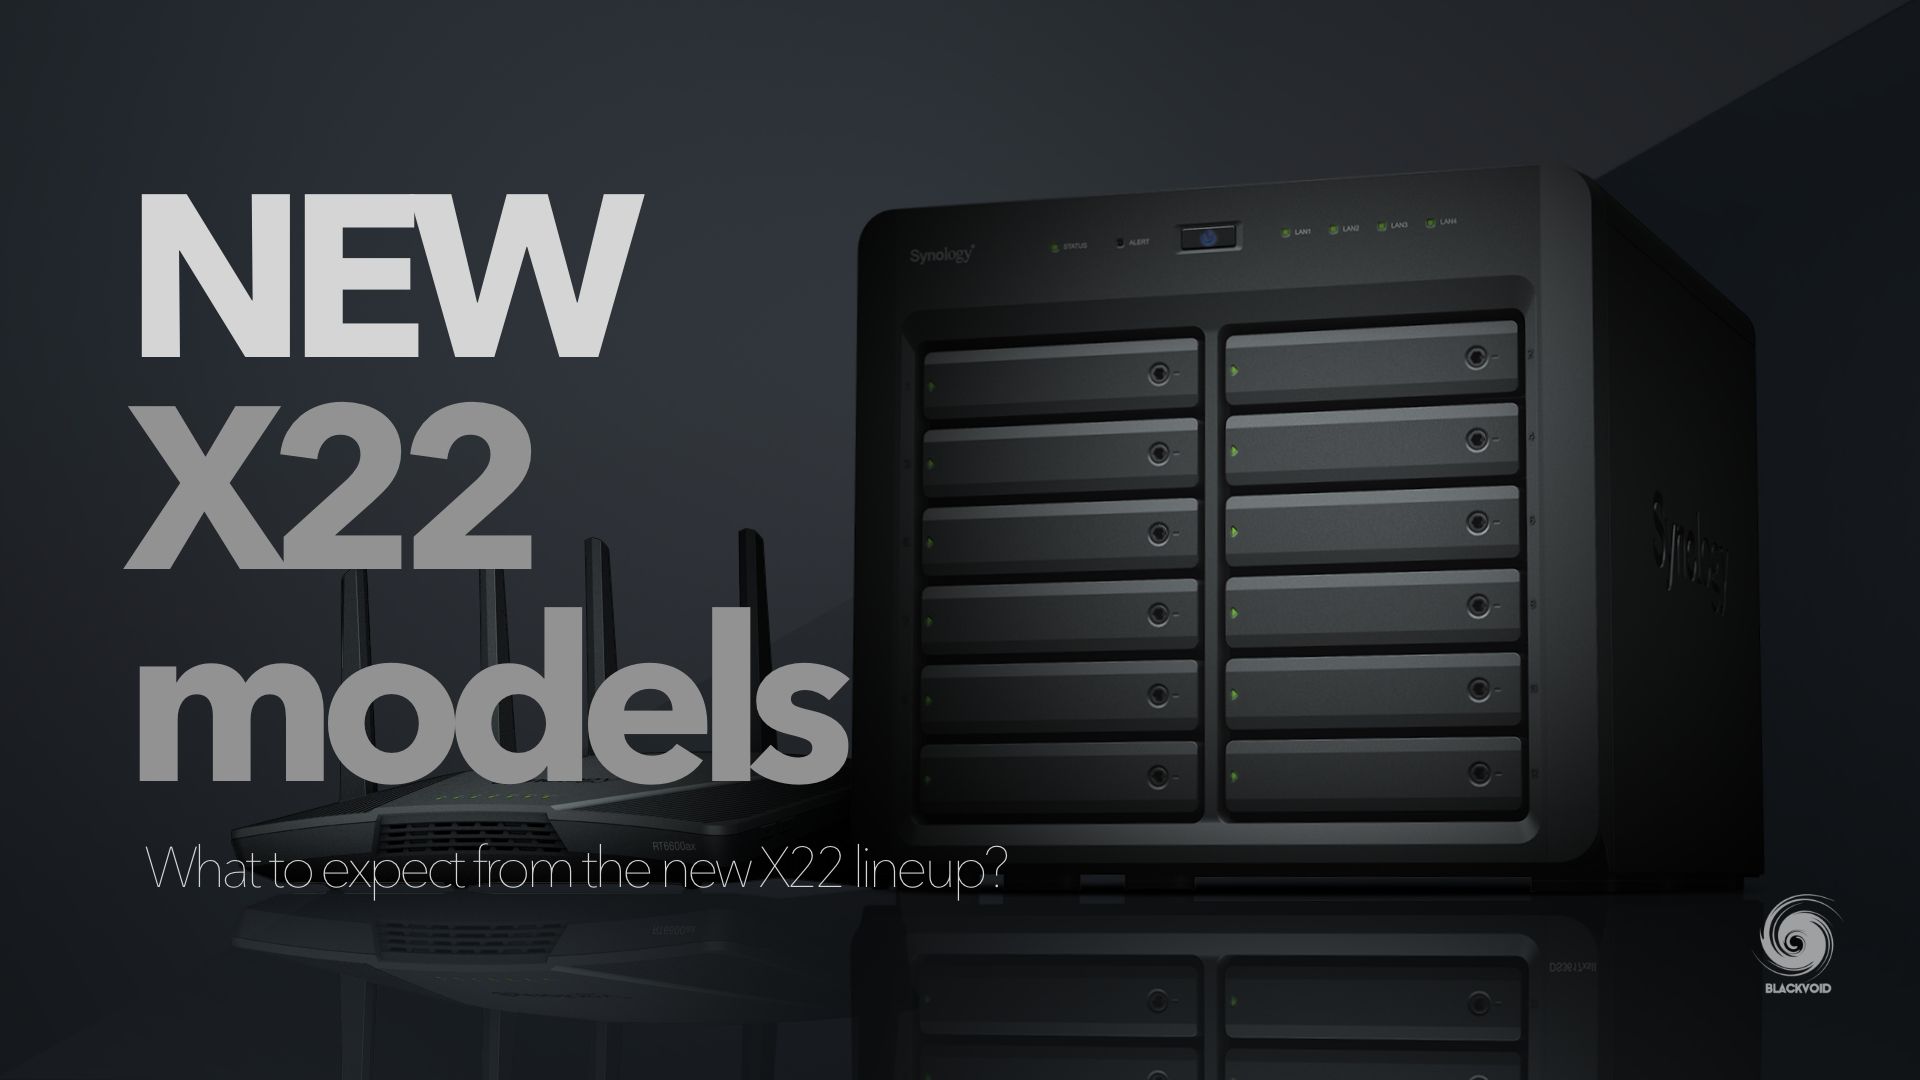 NEW x22 models are here!